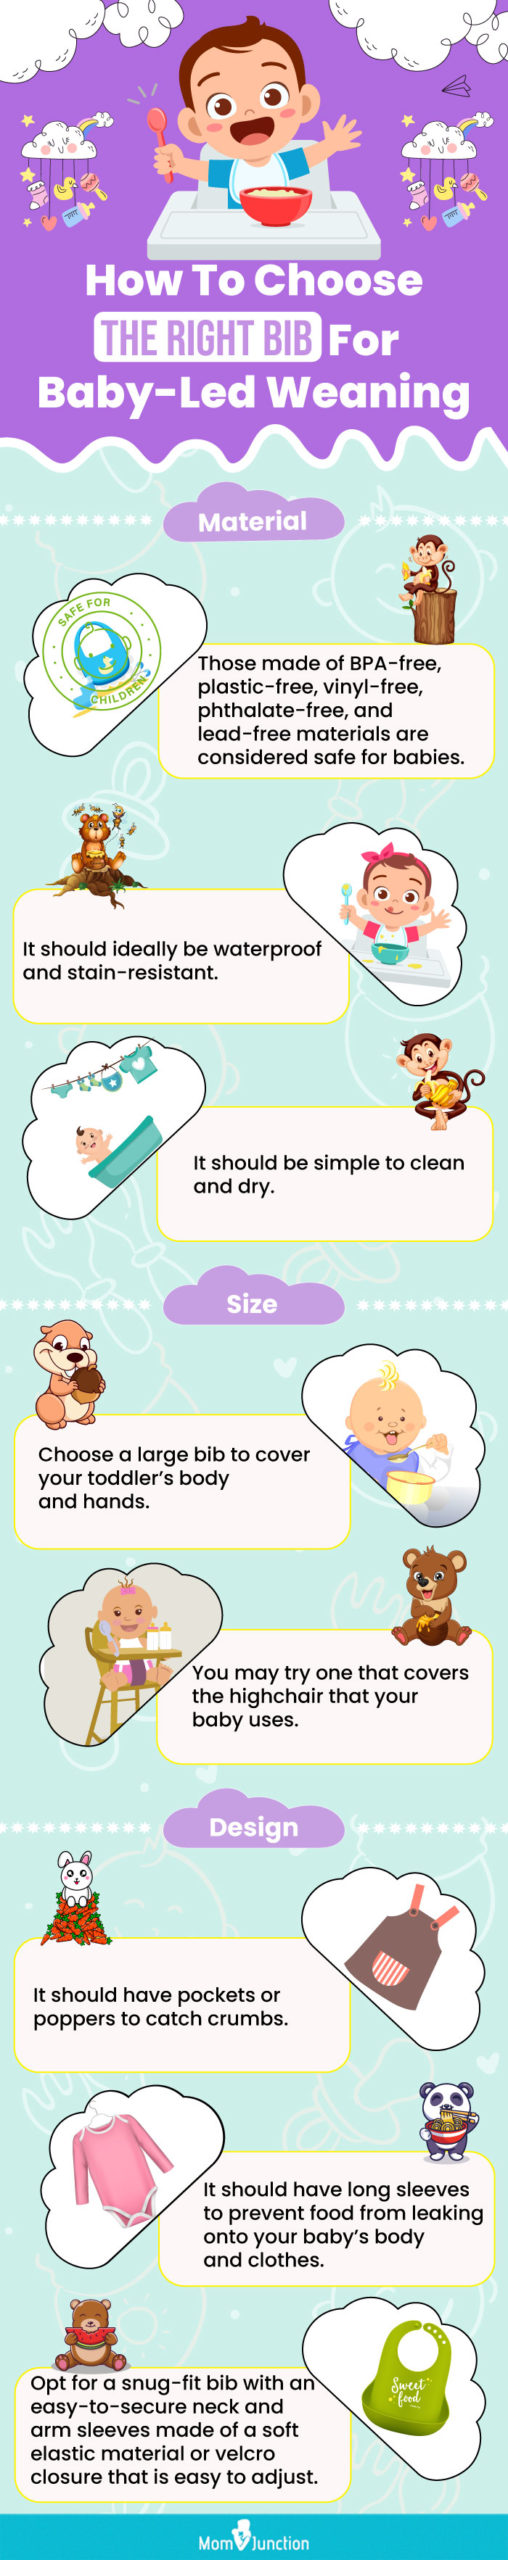 https://www.momjunction.com/wp-content/uploads/2023/02/How-To-Choose-The-Right-Bib-For-Baby-Led-Weaning-scaled.jpg